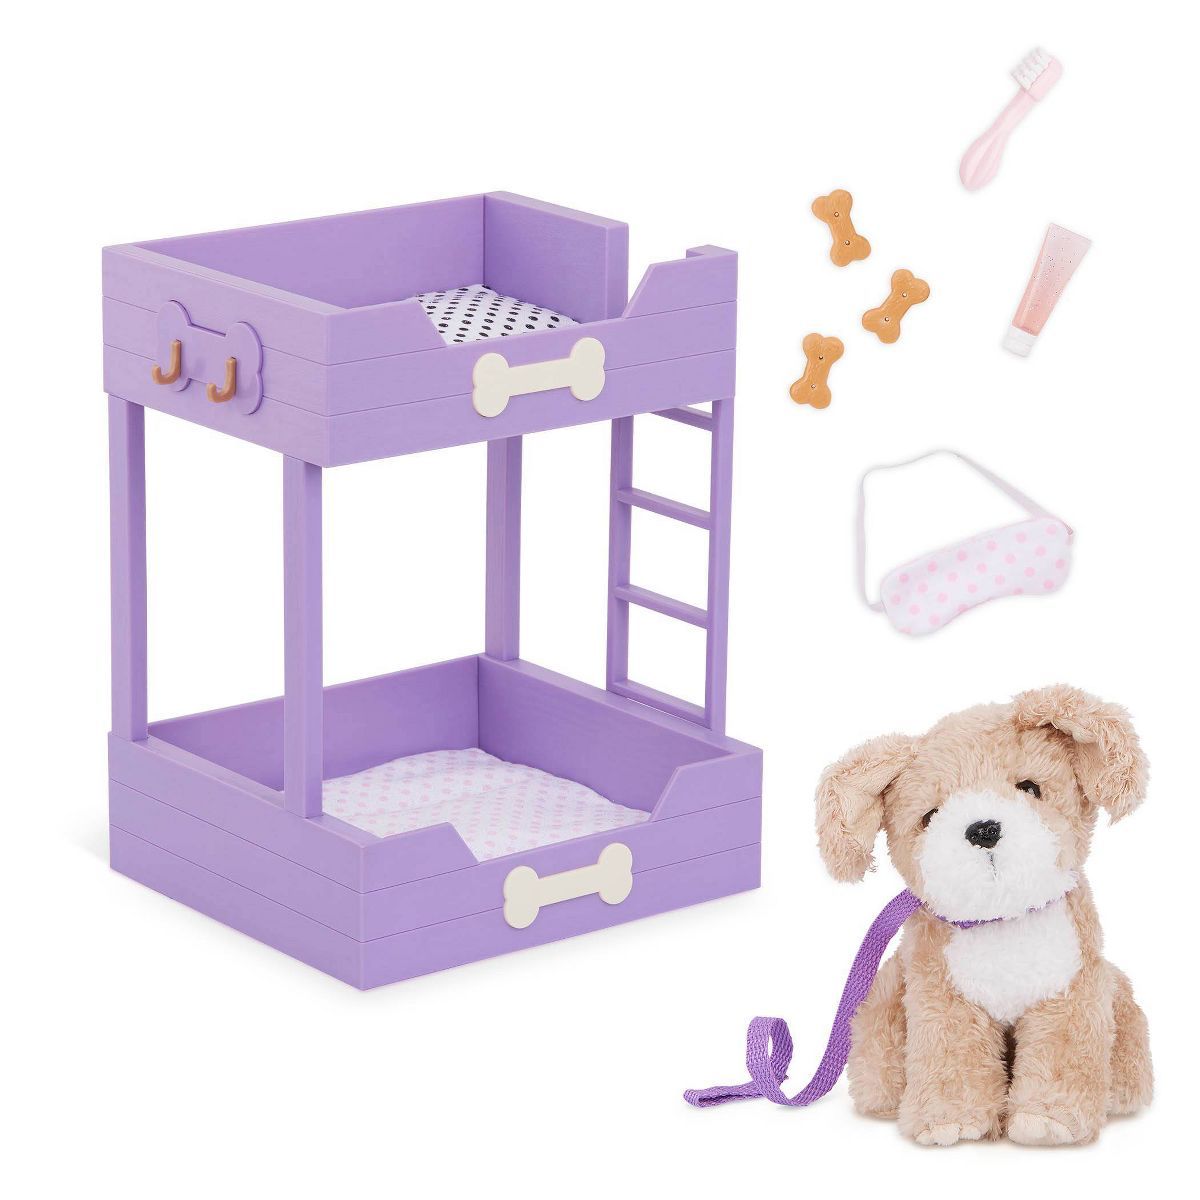 Our Generation Pet Dog Plush & Bunk Bed Home Furniture Accessory Set | Target